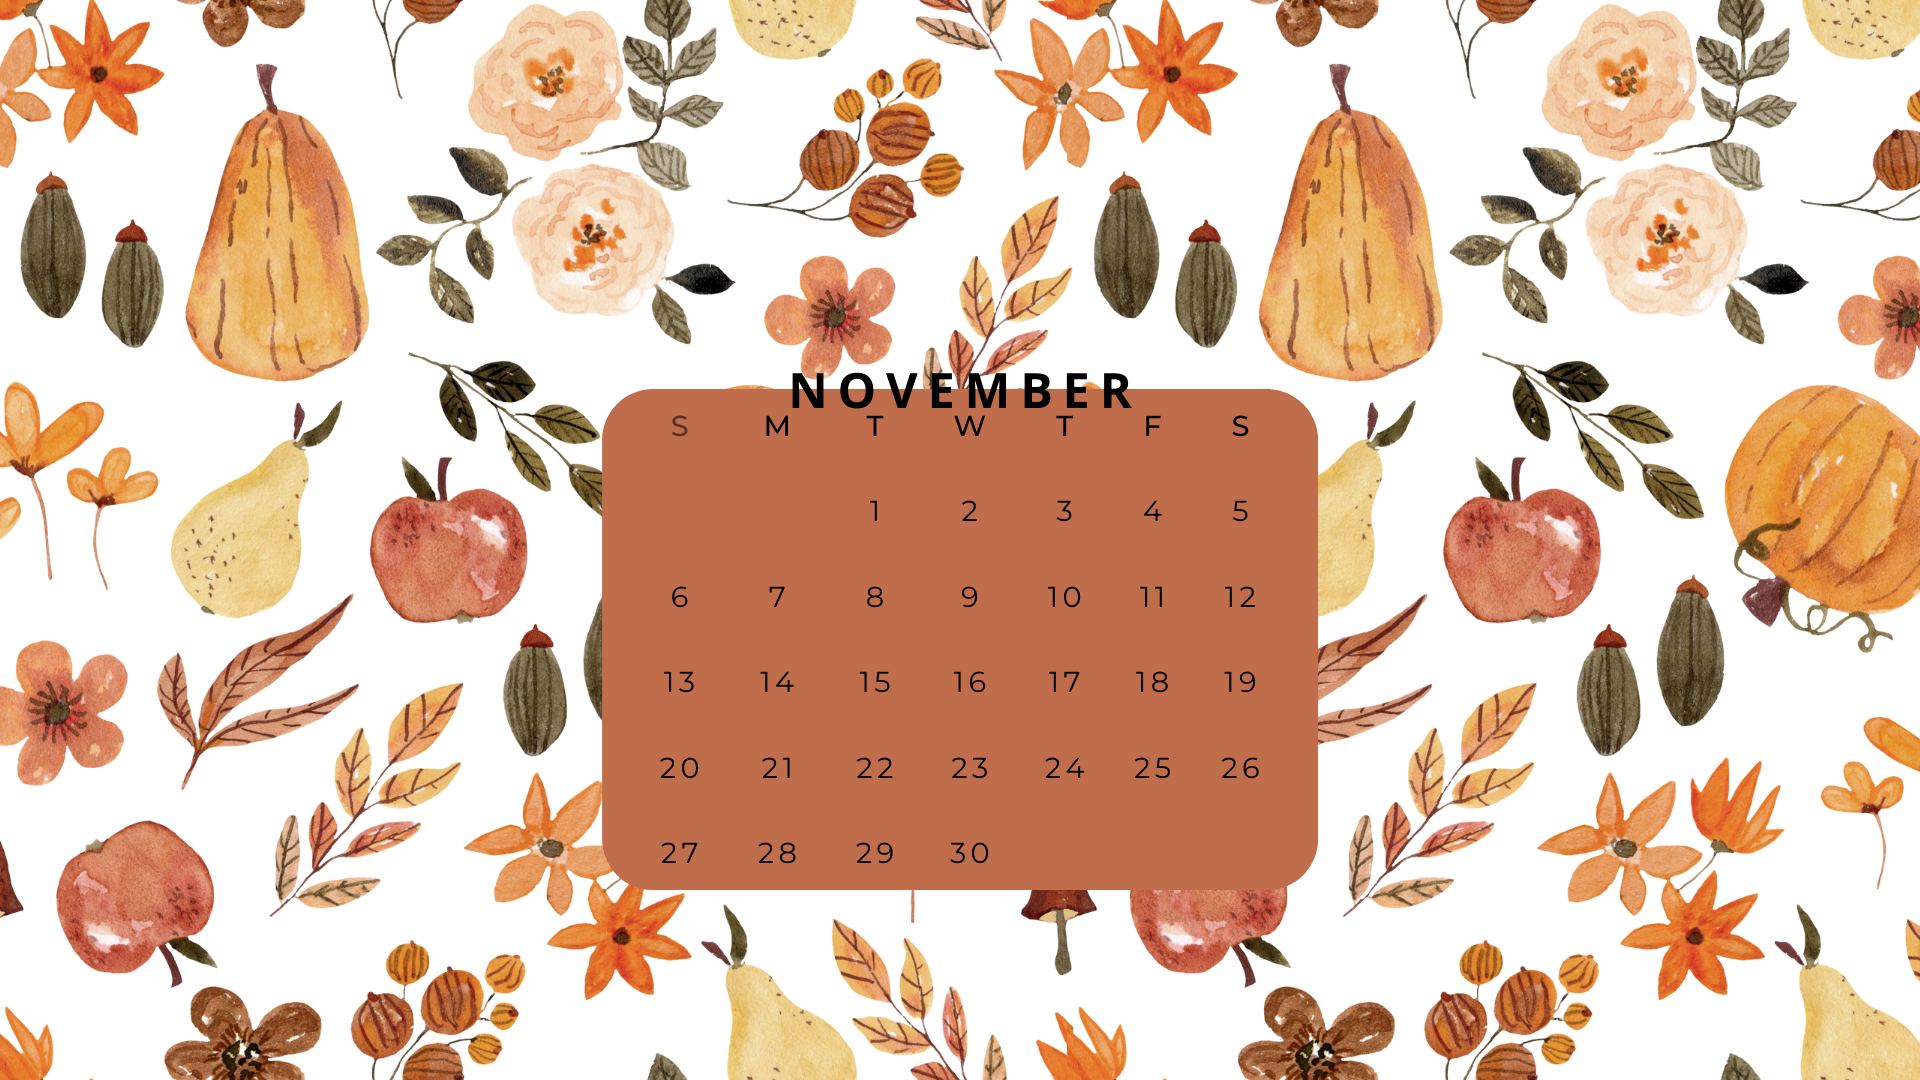 Free November 2022 Desktop Calendar Backgrounds; Here are your free November backgrounds for computers and laptops. Tech freebies for this month!